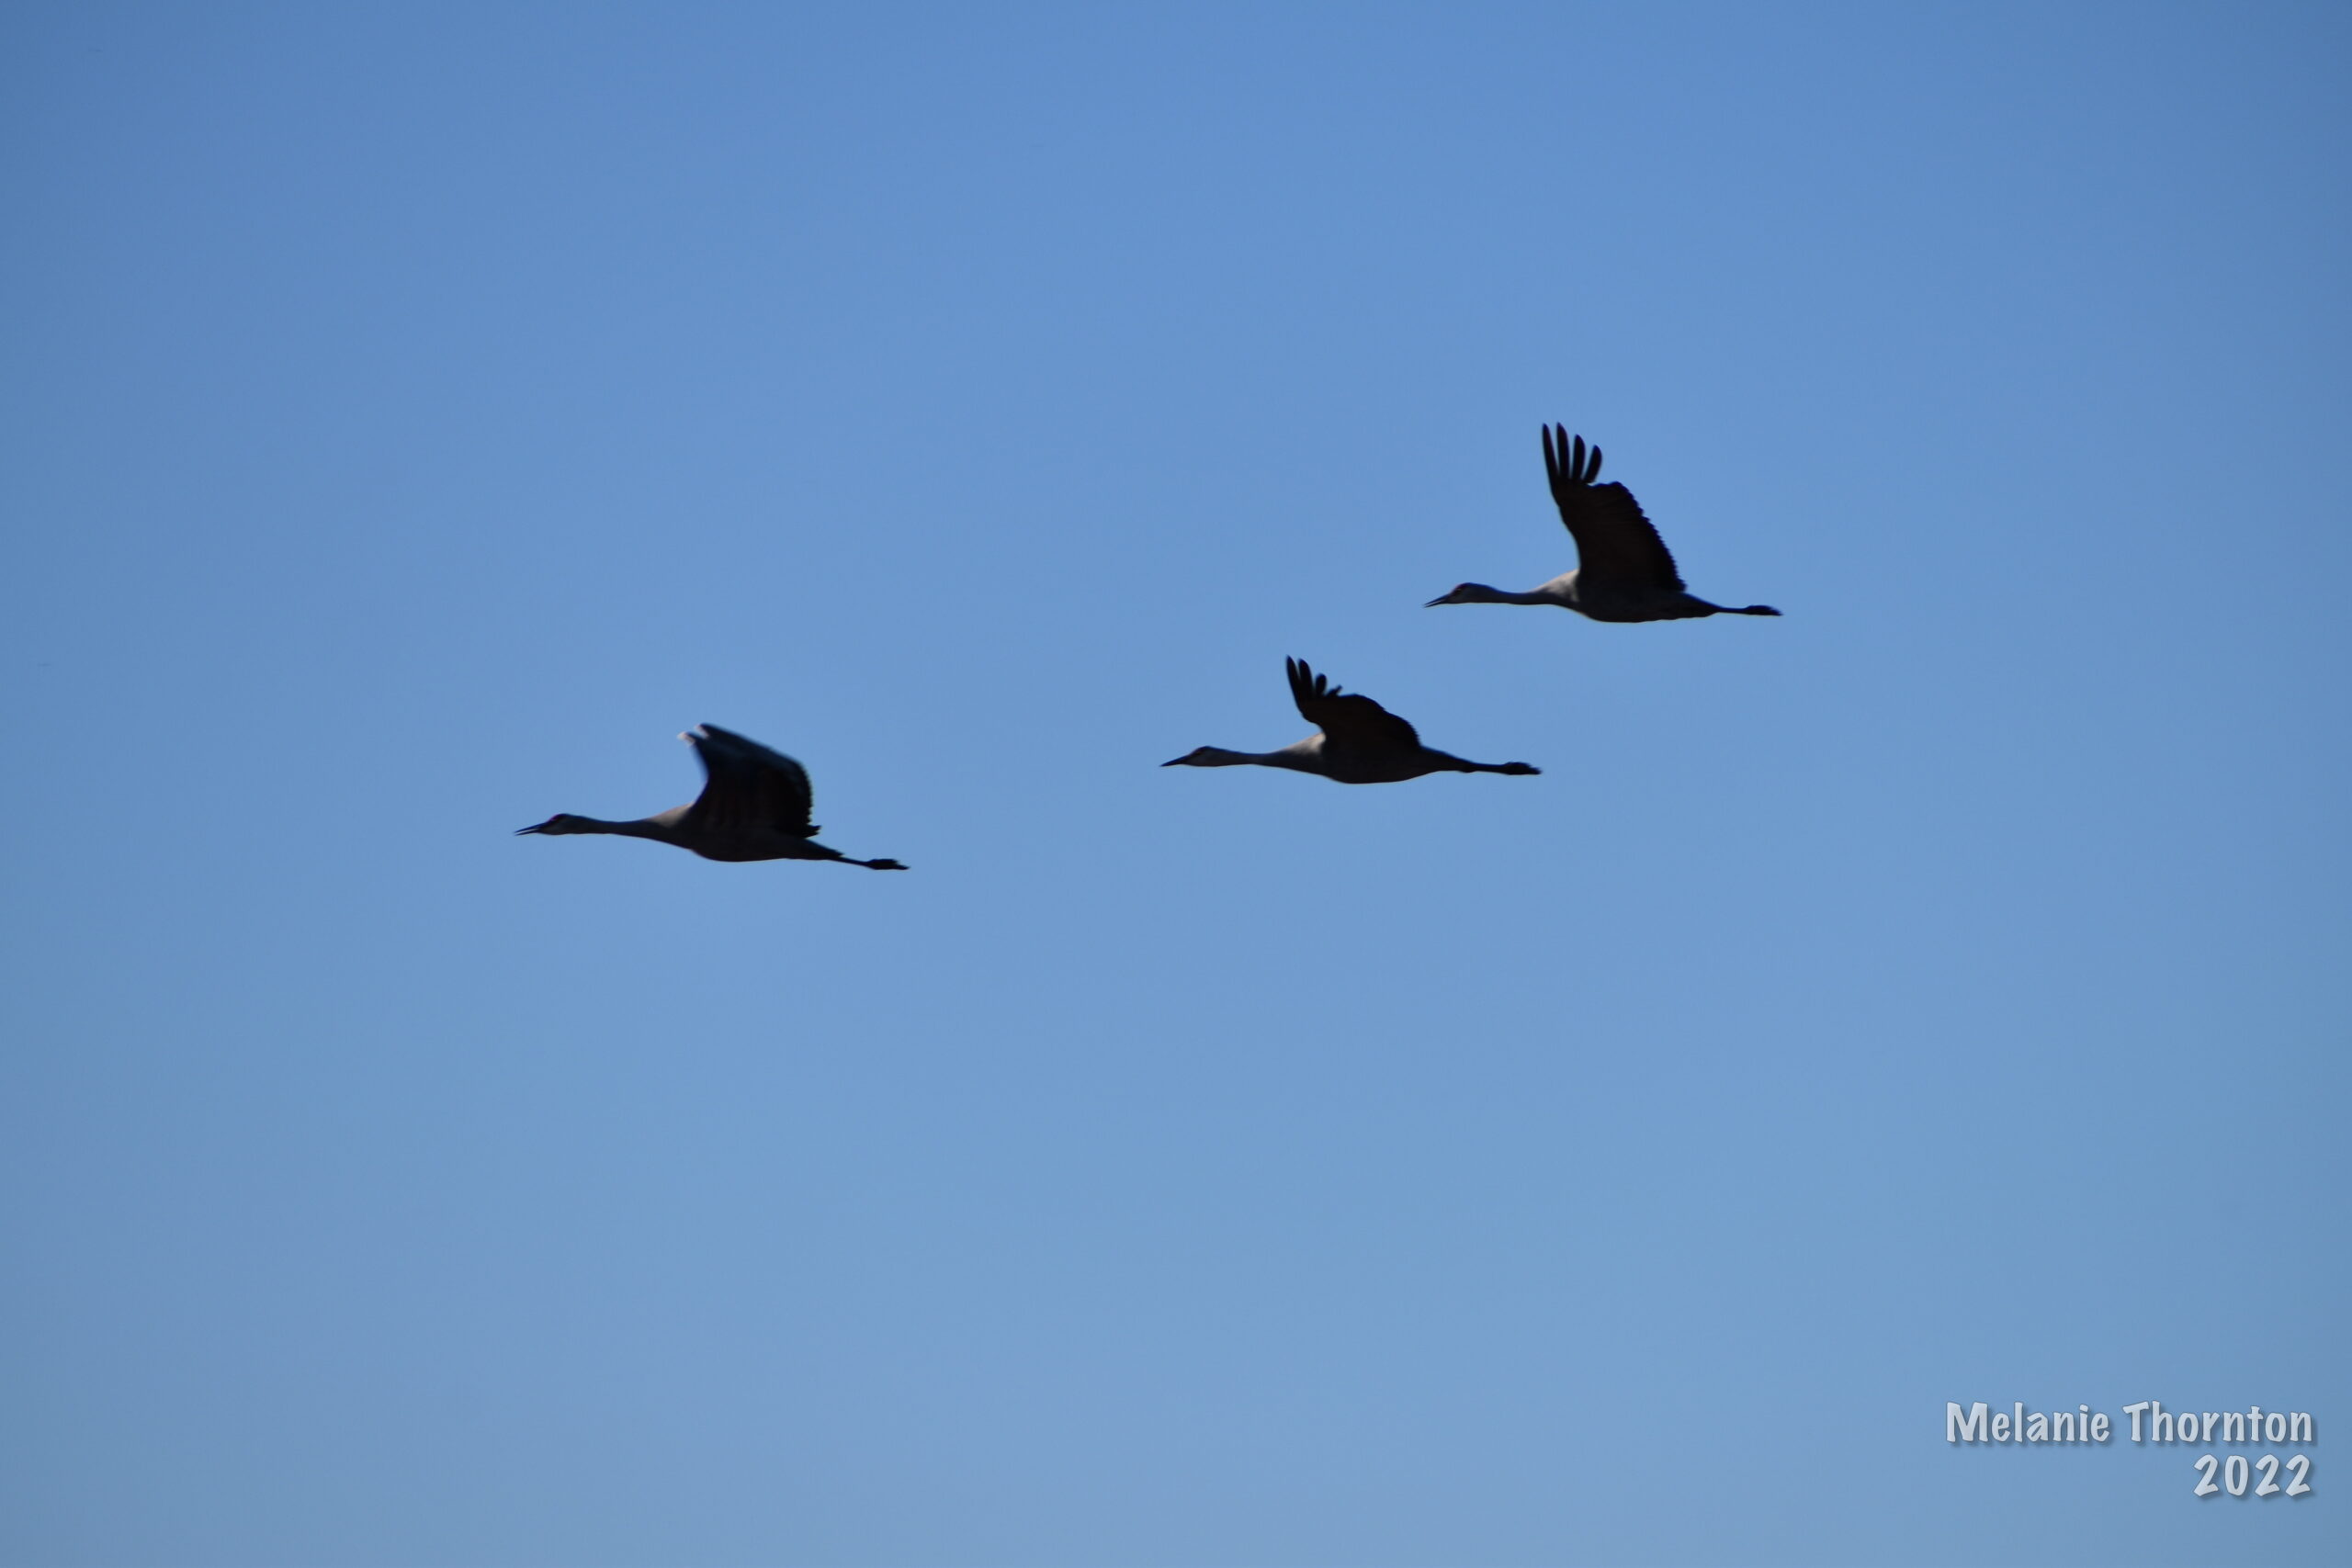 Three large birds are silhouetted against a bright blue sky